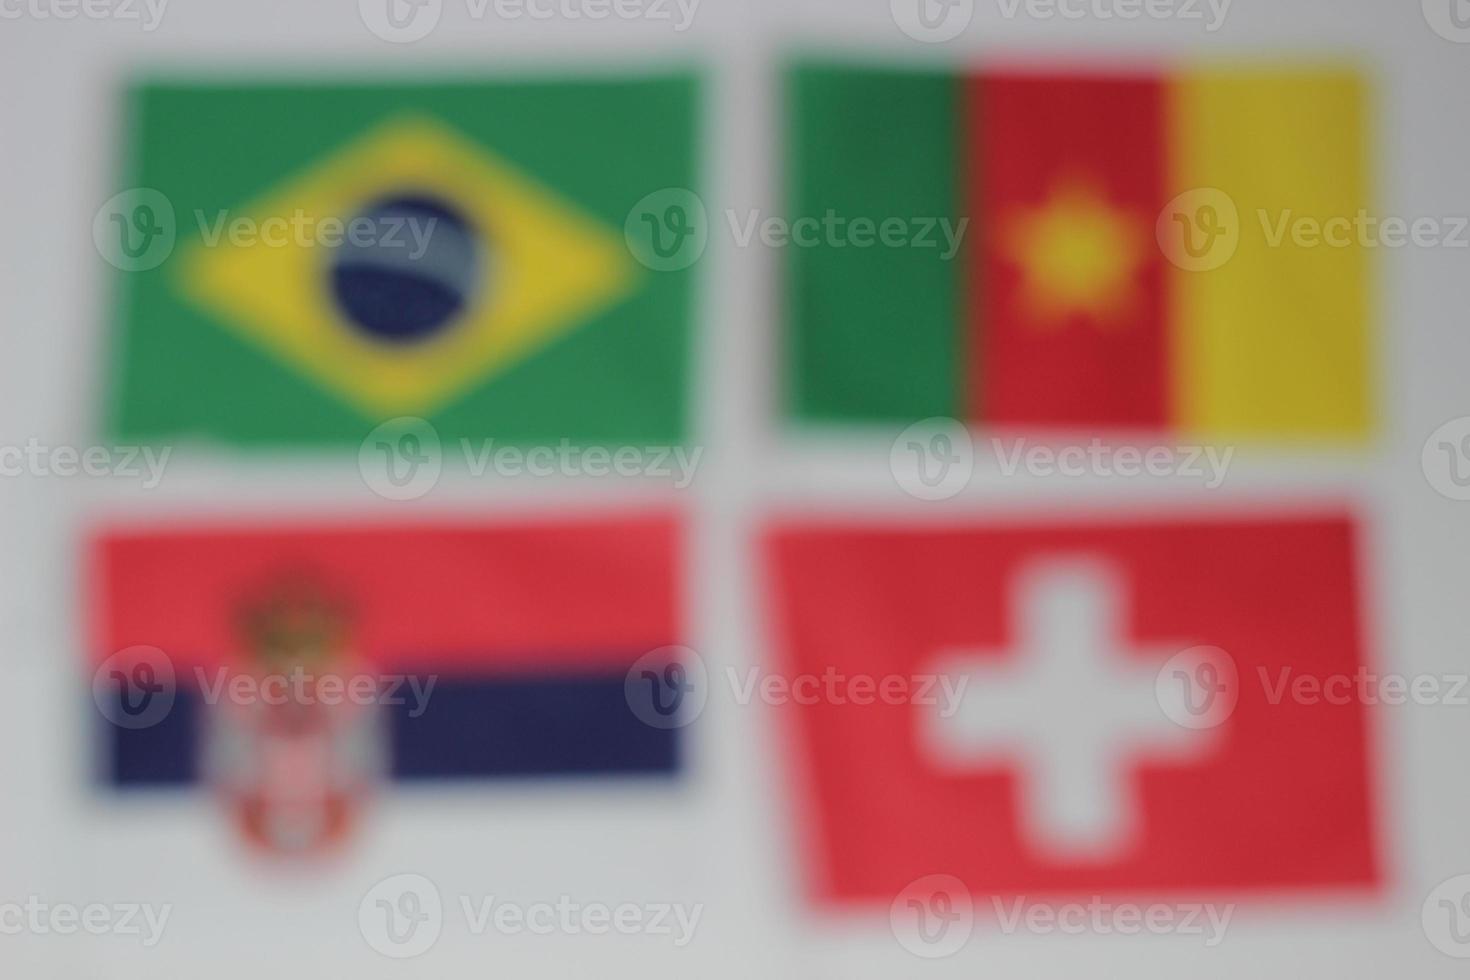 Leather soccer ball with international team flags of the participating countries in the championship tournament isolated on white background. Football equipment competitive game. World cup concept. photo